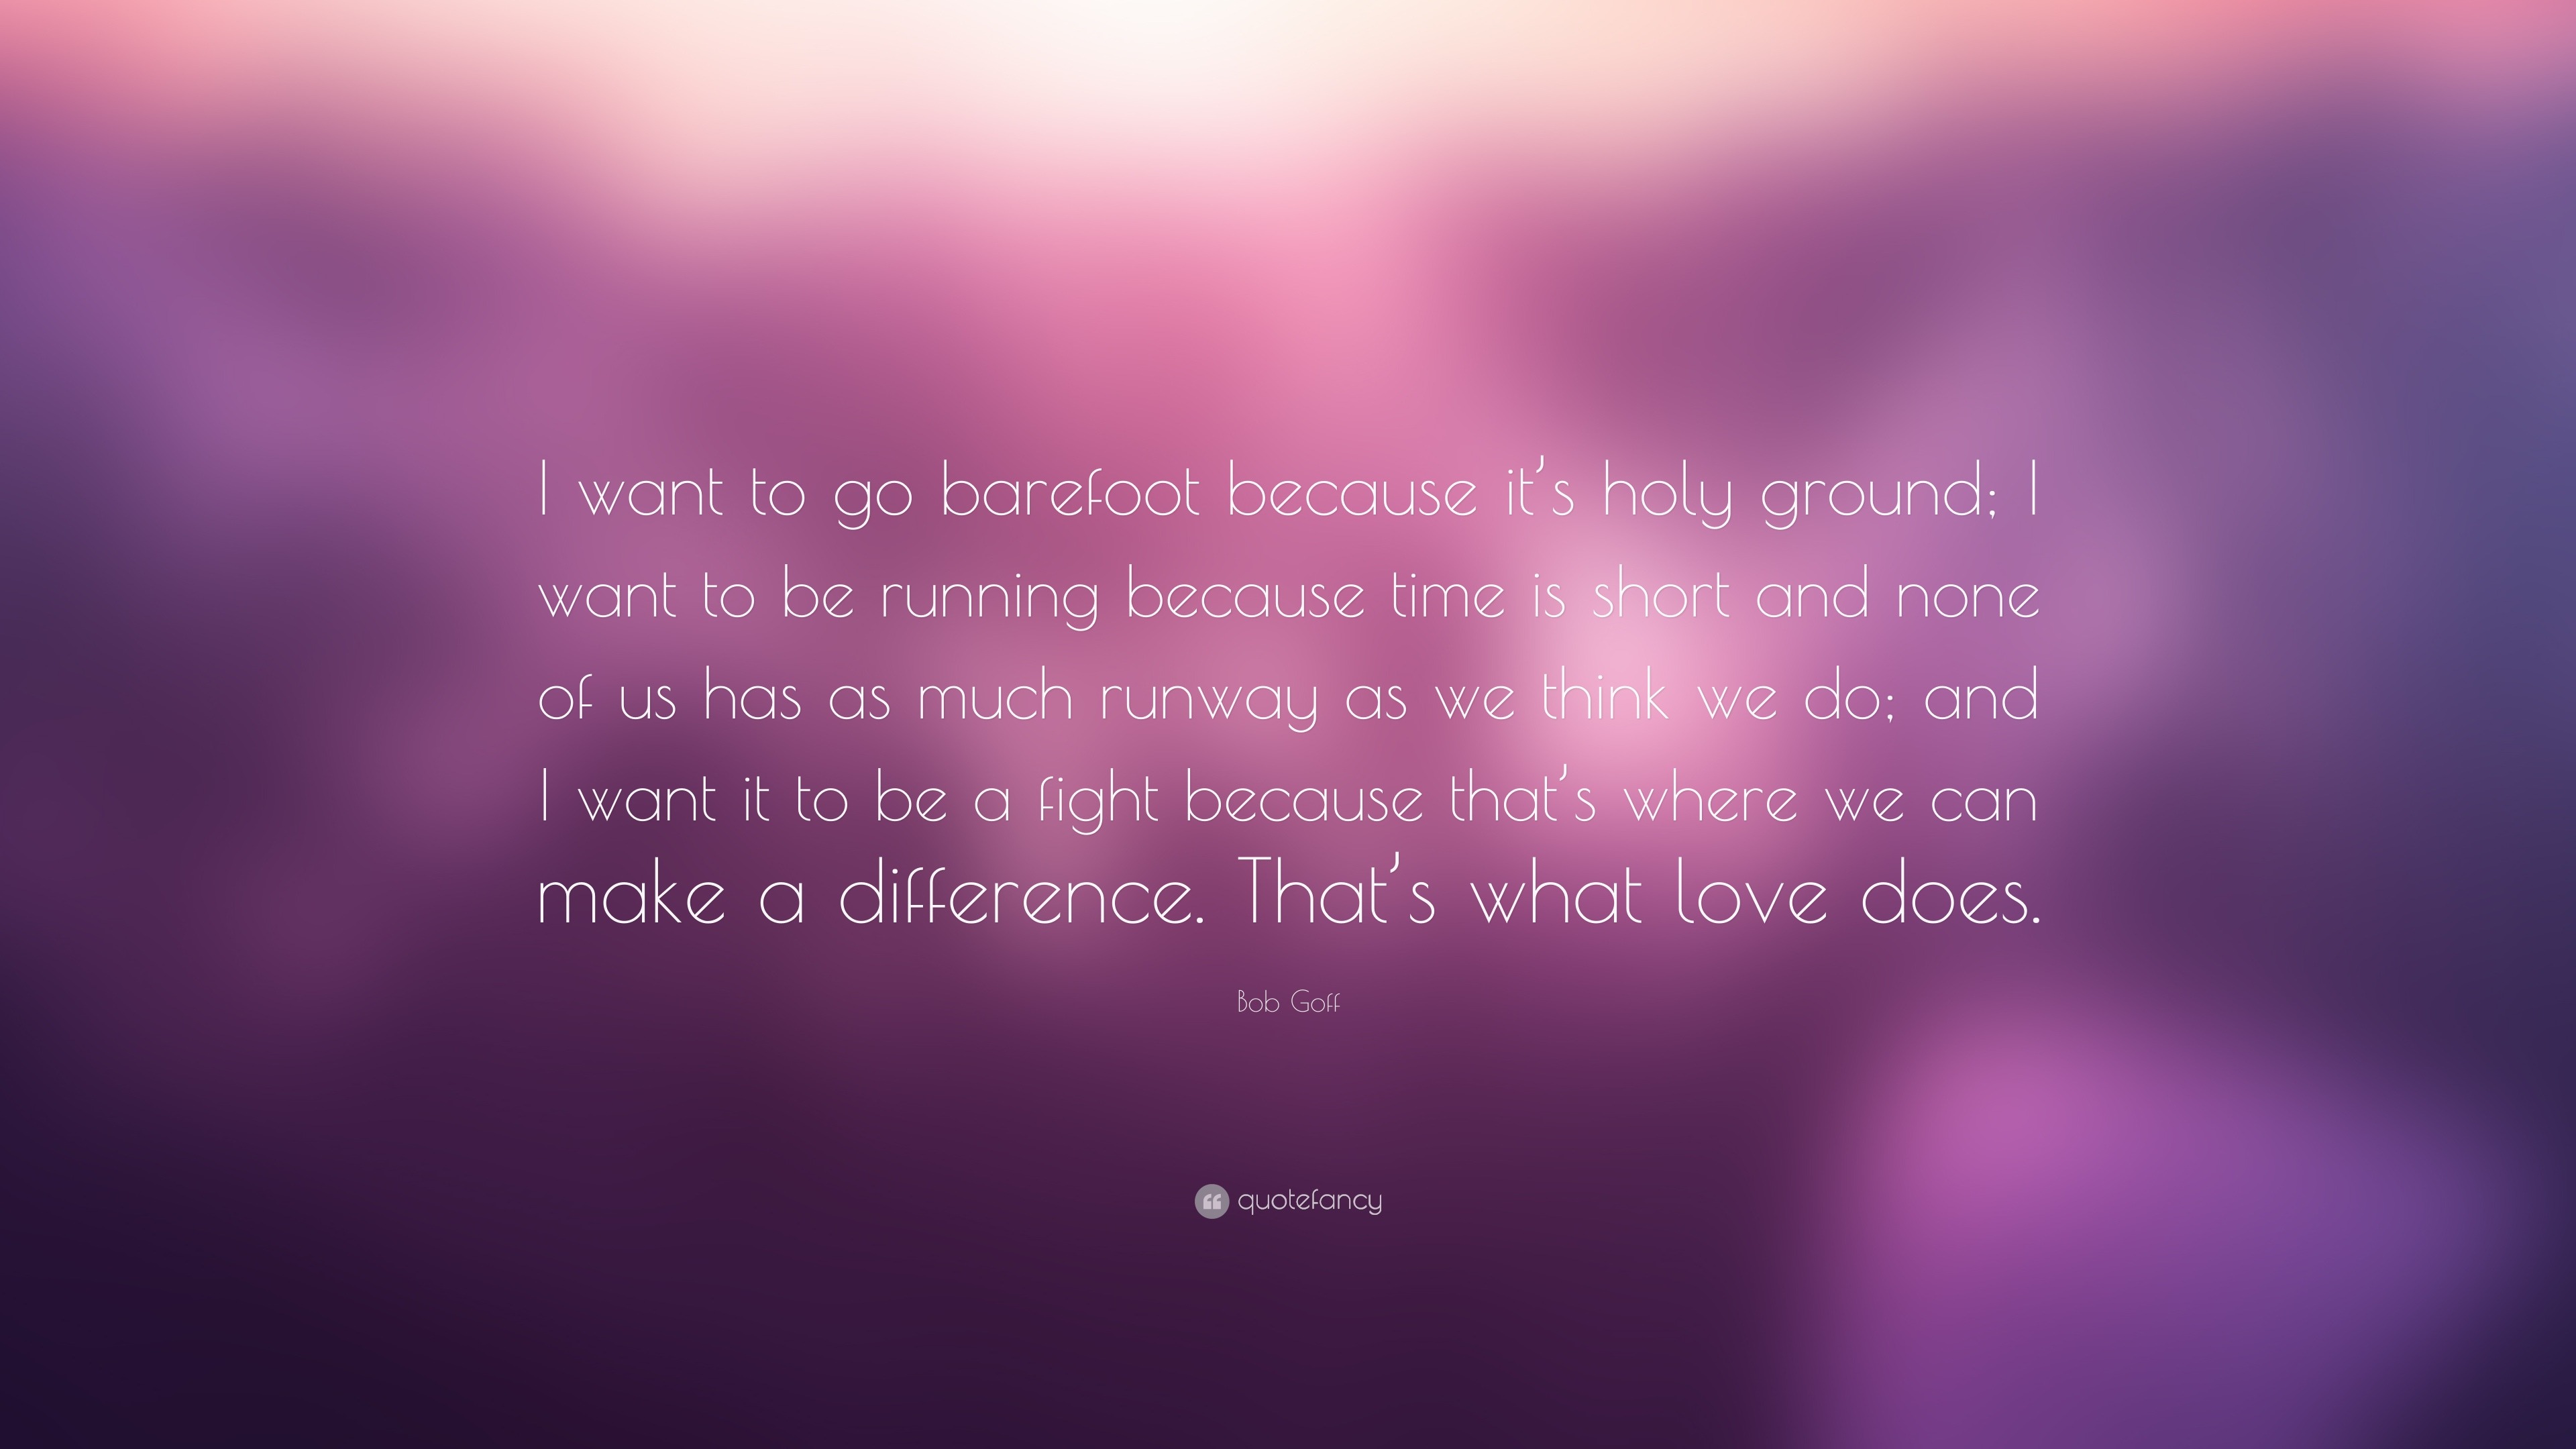 Bob Goff Quote: “I want to go barefoot because it’s holy ground; I want ...